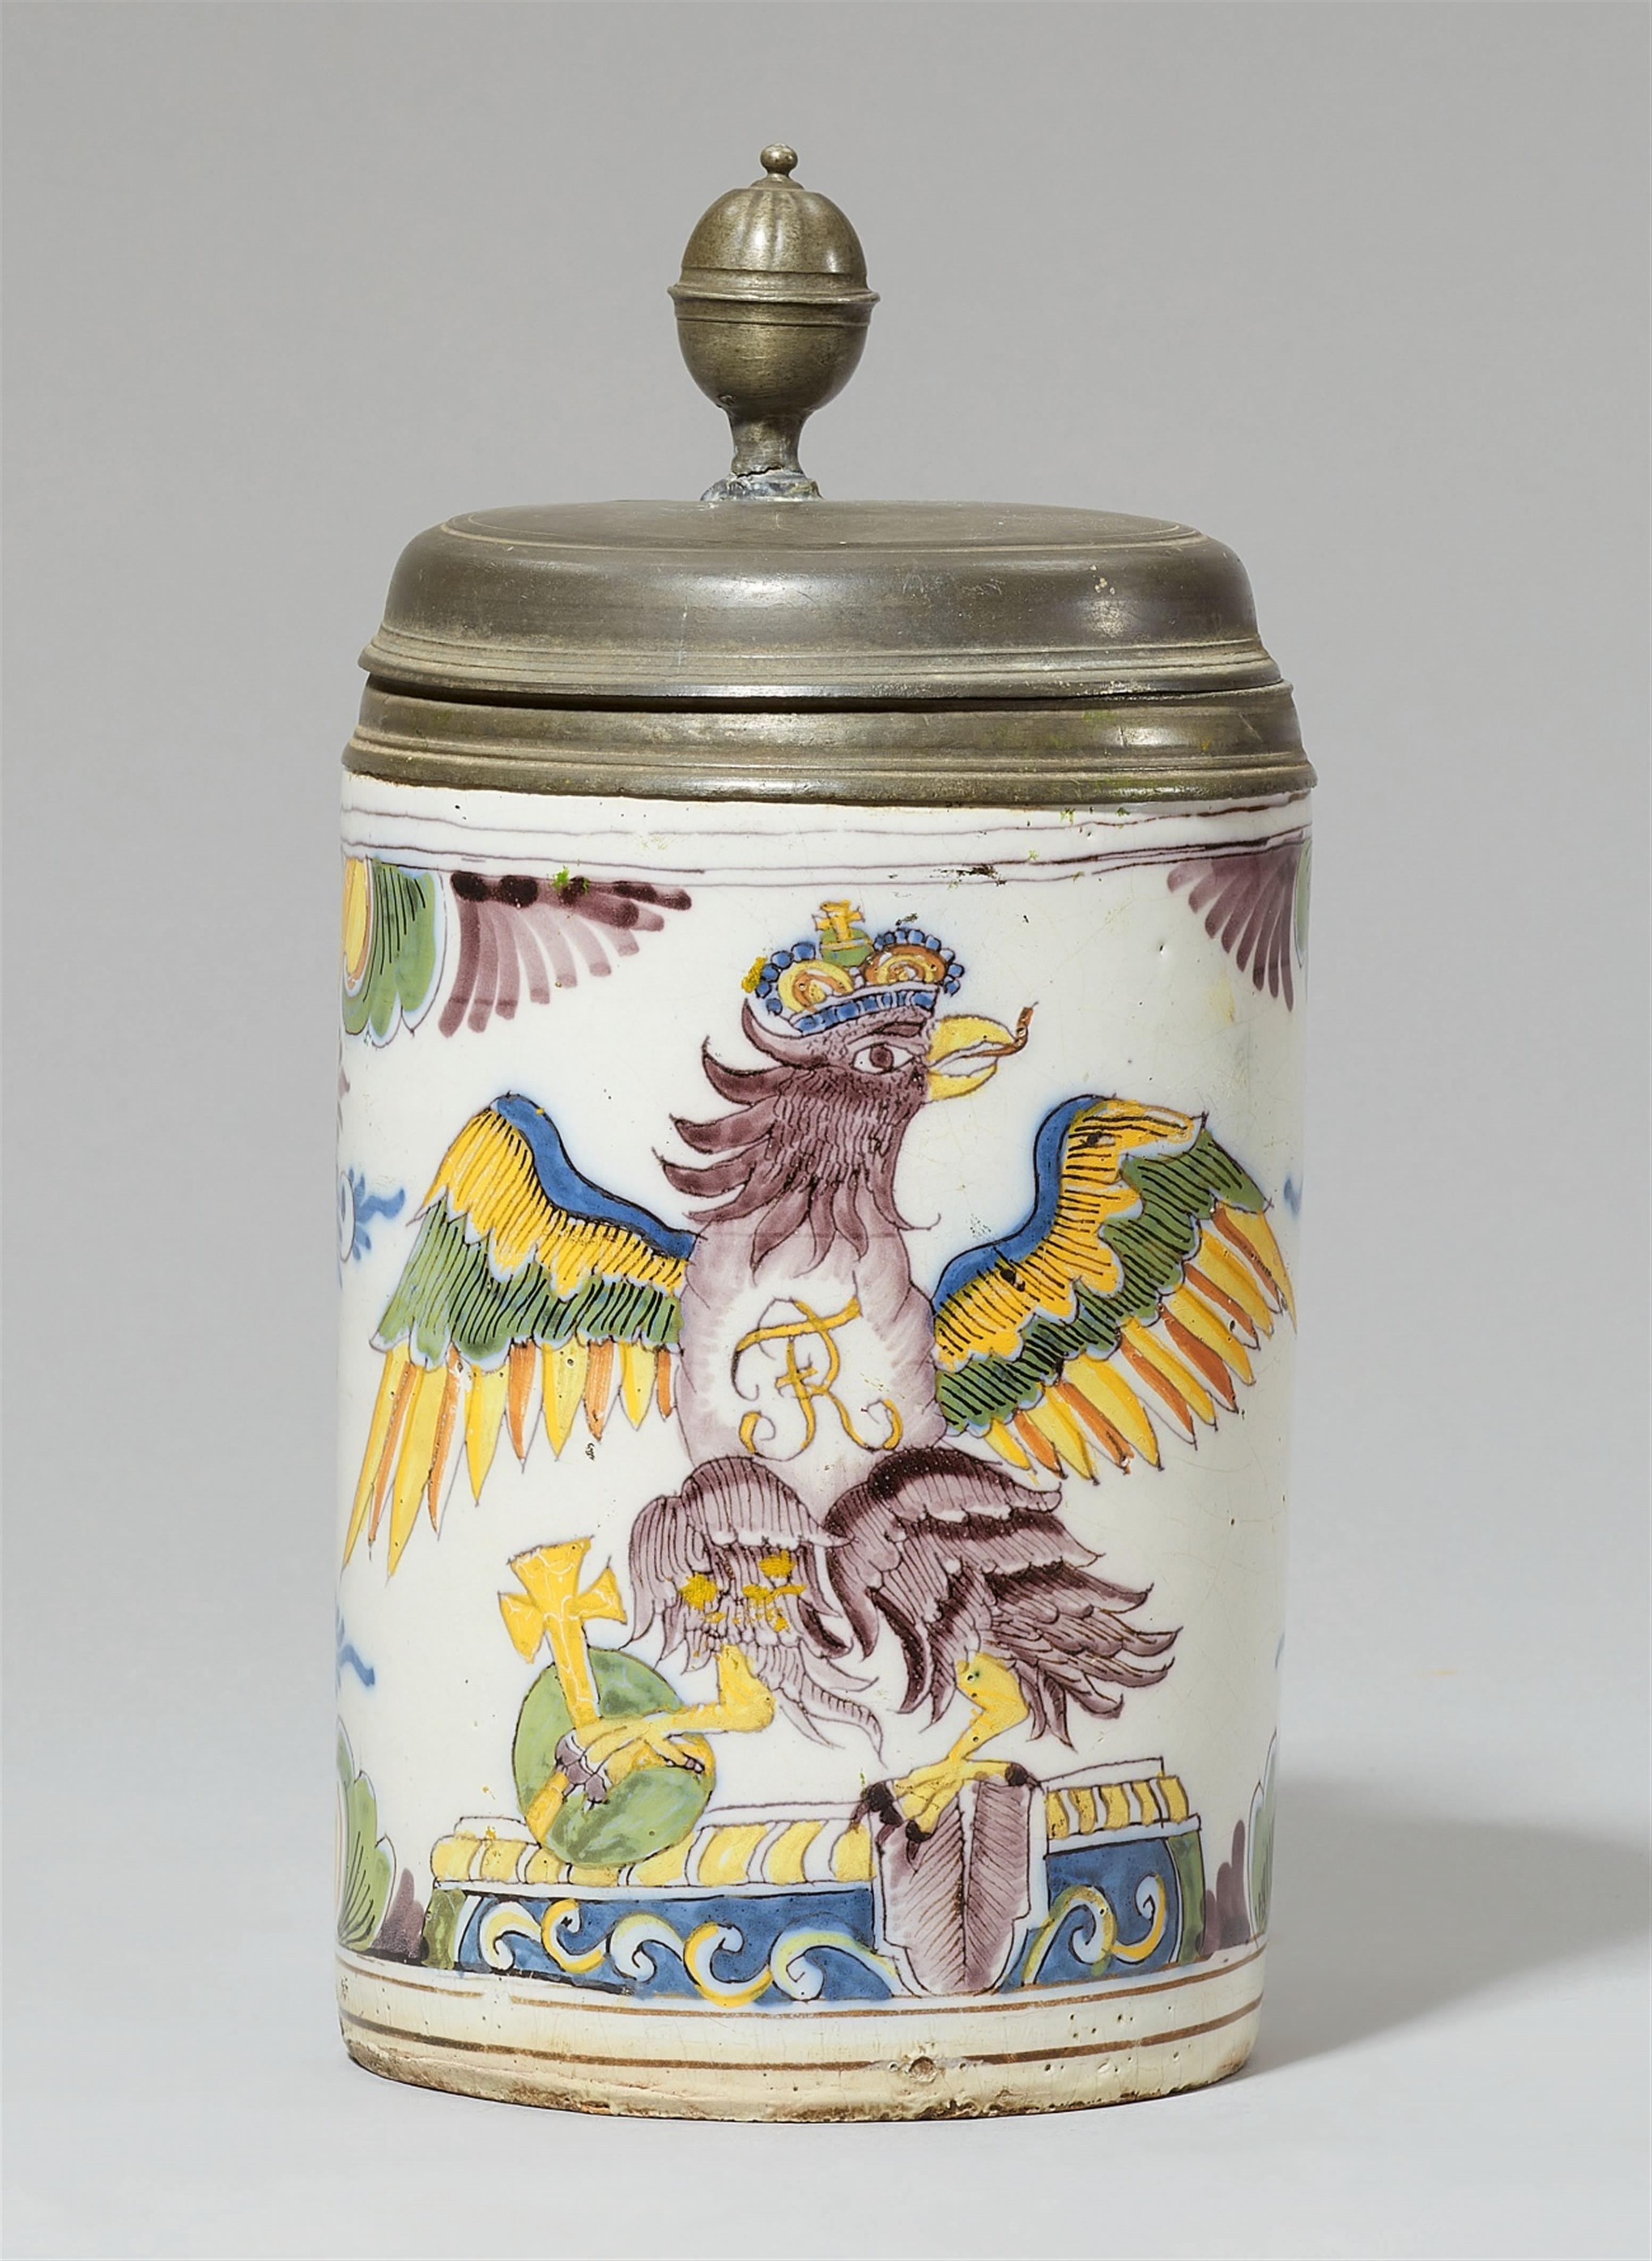 A Berlin faience tankard with the Prussian eagle - image-1